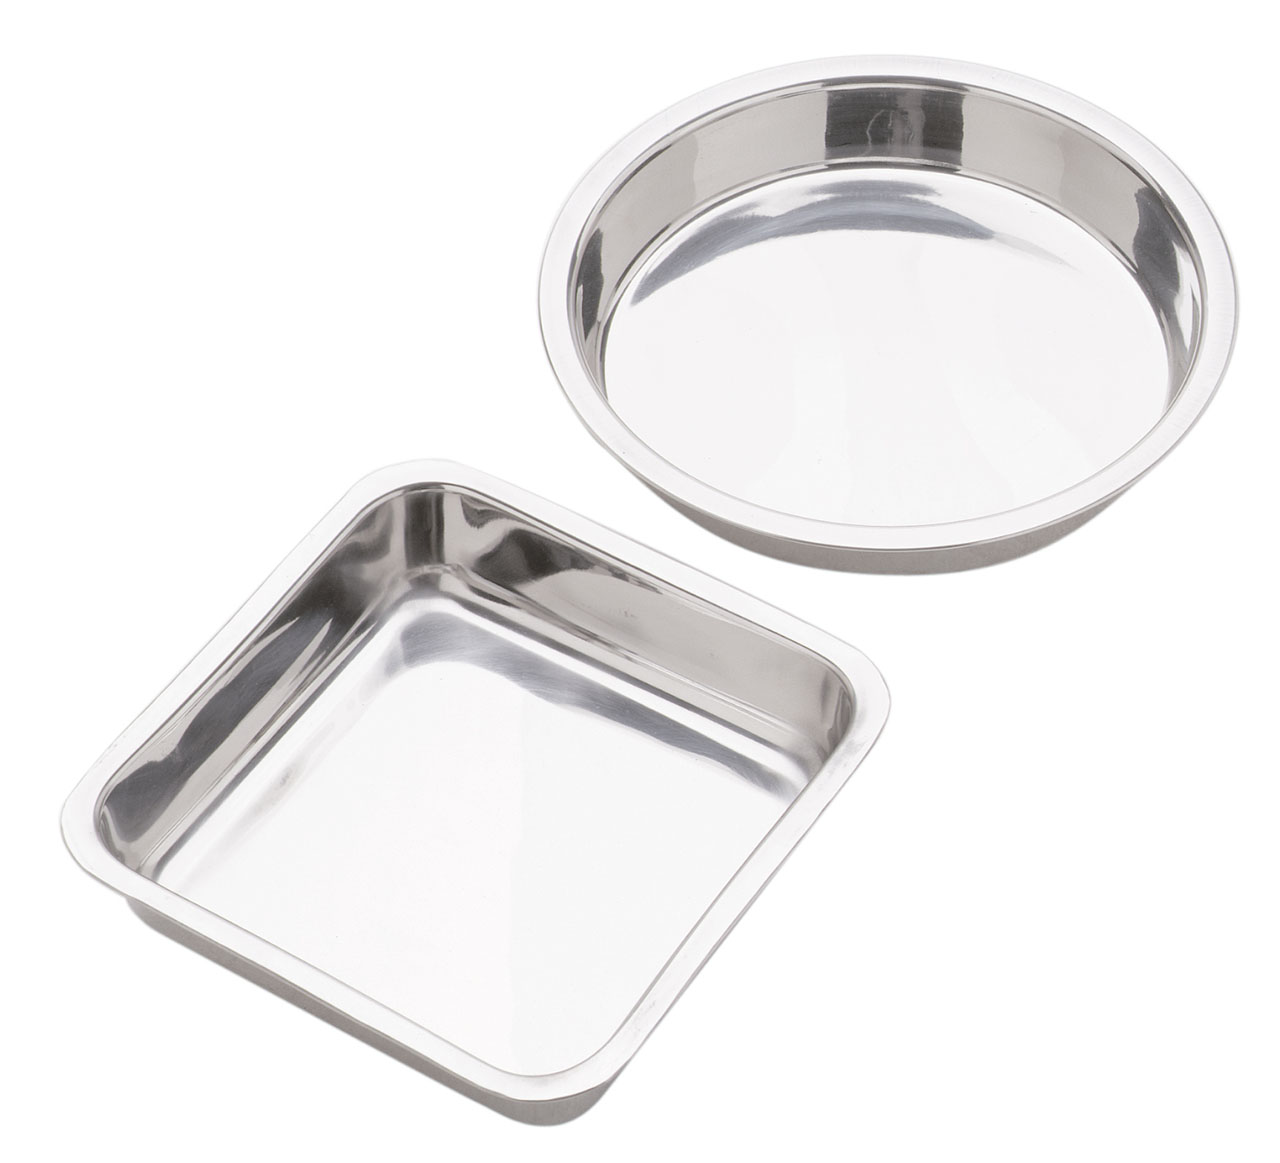 3814 Norpro 8 Inch Stainless Steel Square Cake Pan 